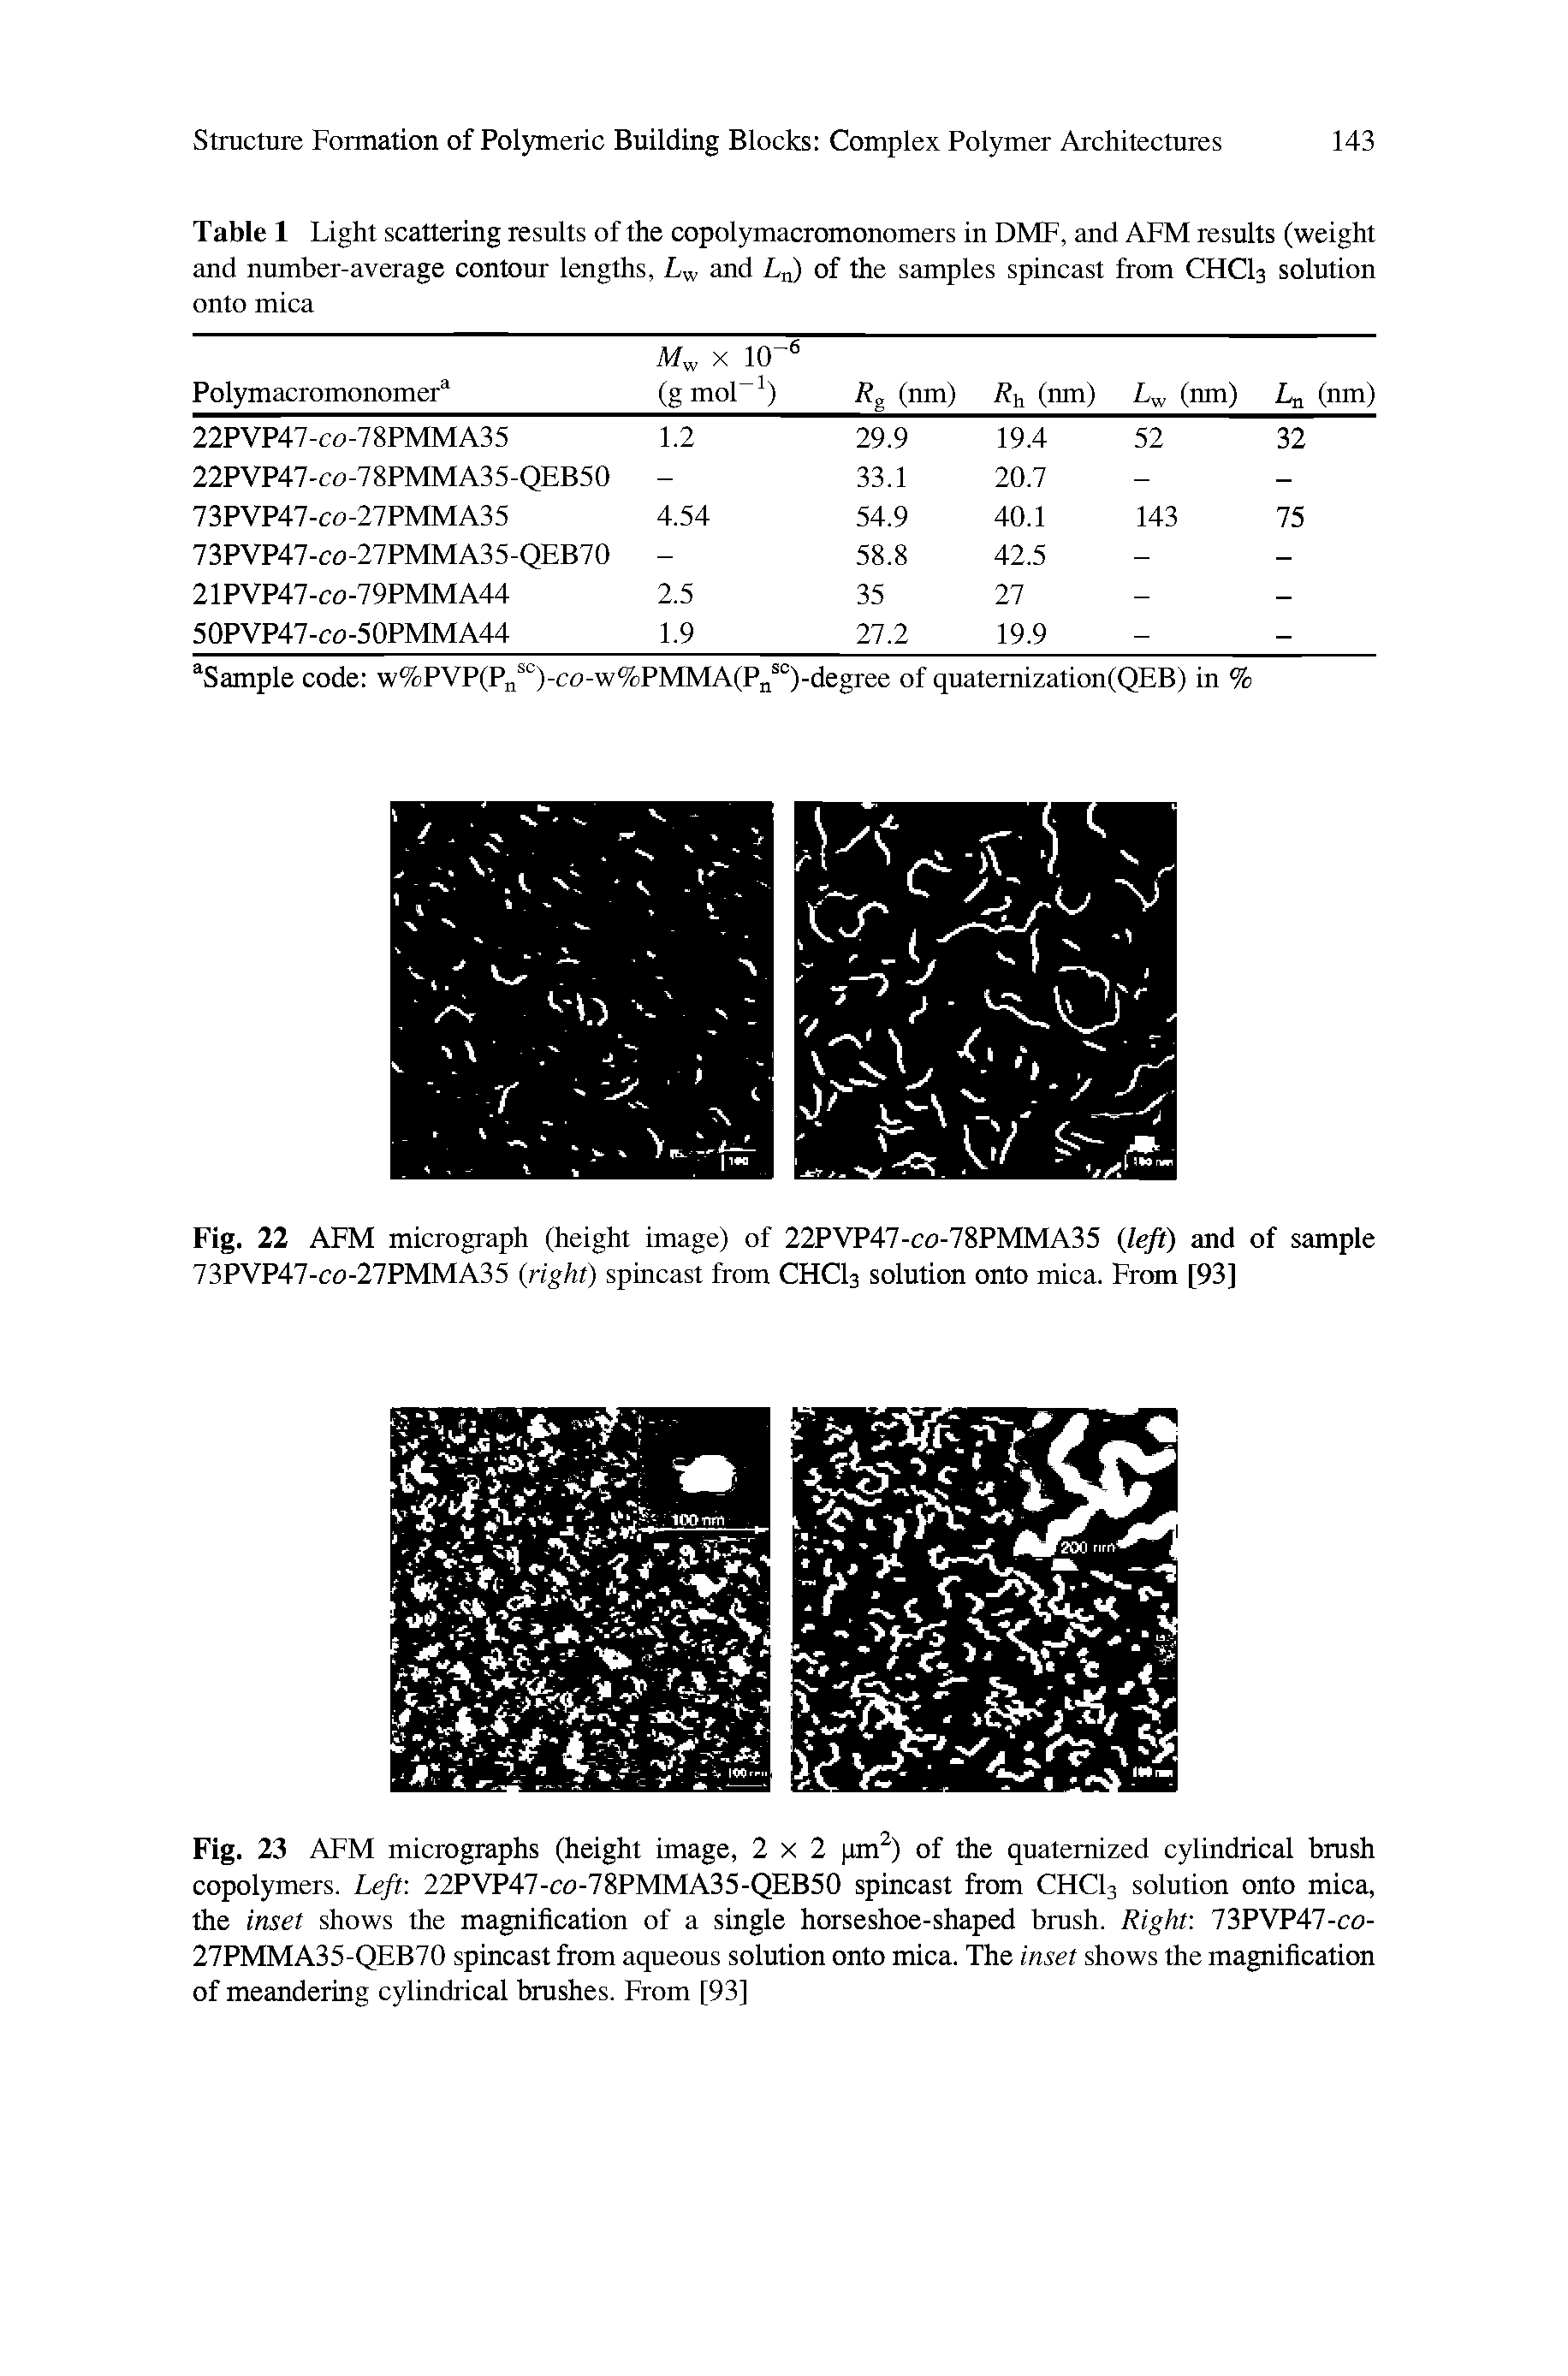 Table 1 Light scattering results of the copolymacromonomers in DMF, and AFM results (weight and number-average contour lengths, L and Ln) of the samples spincast from CHCI3 solution onto mica...